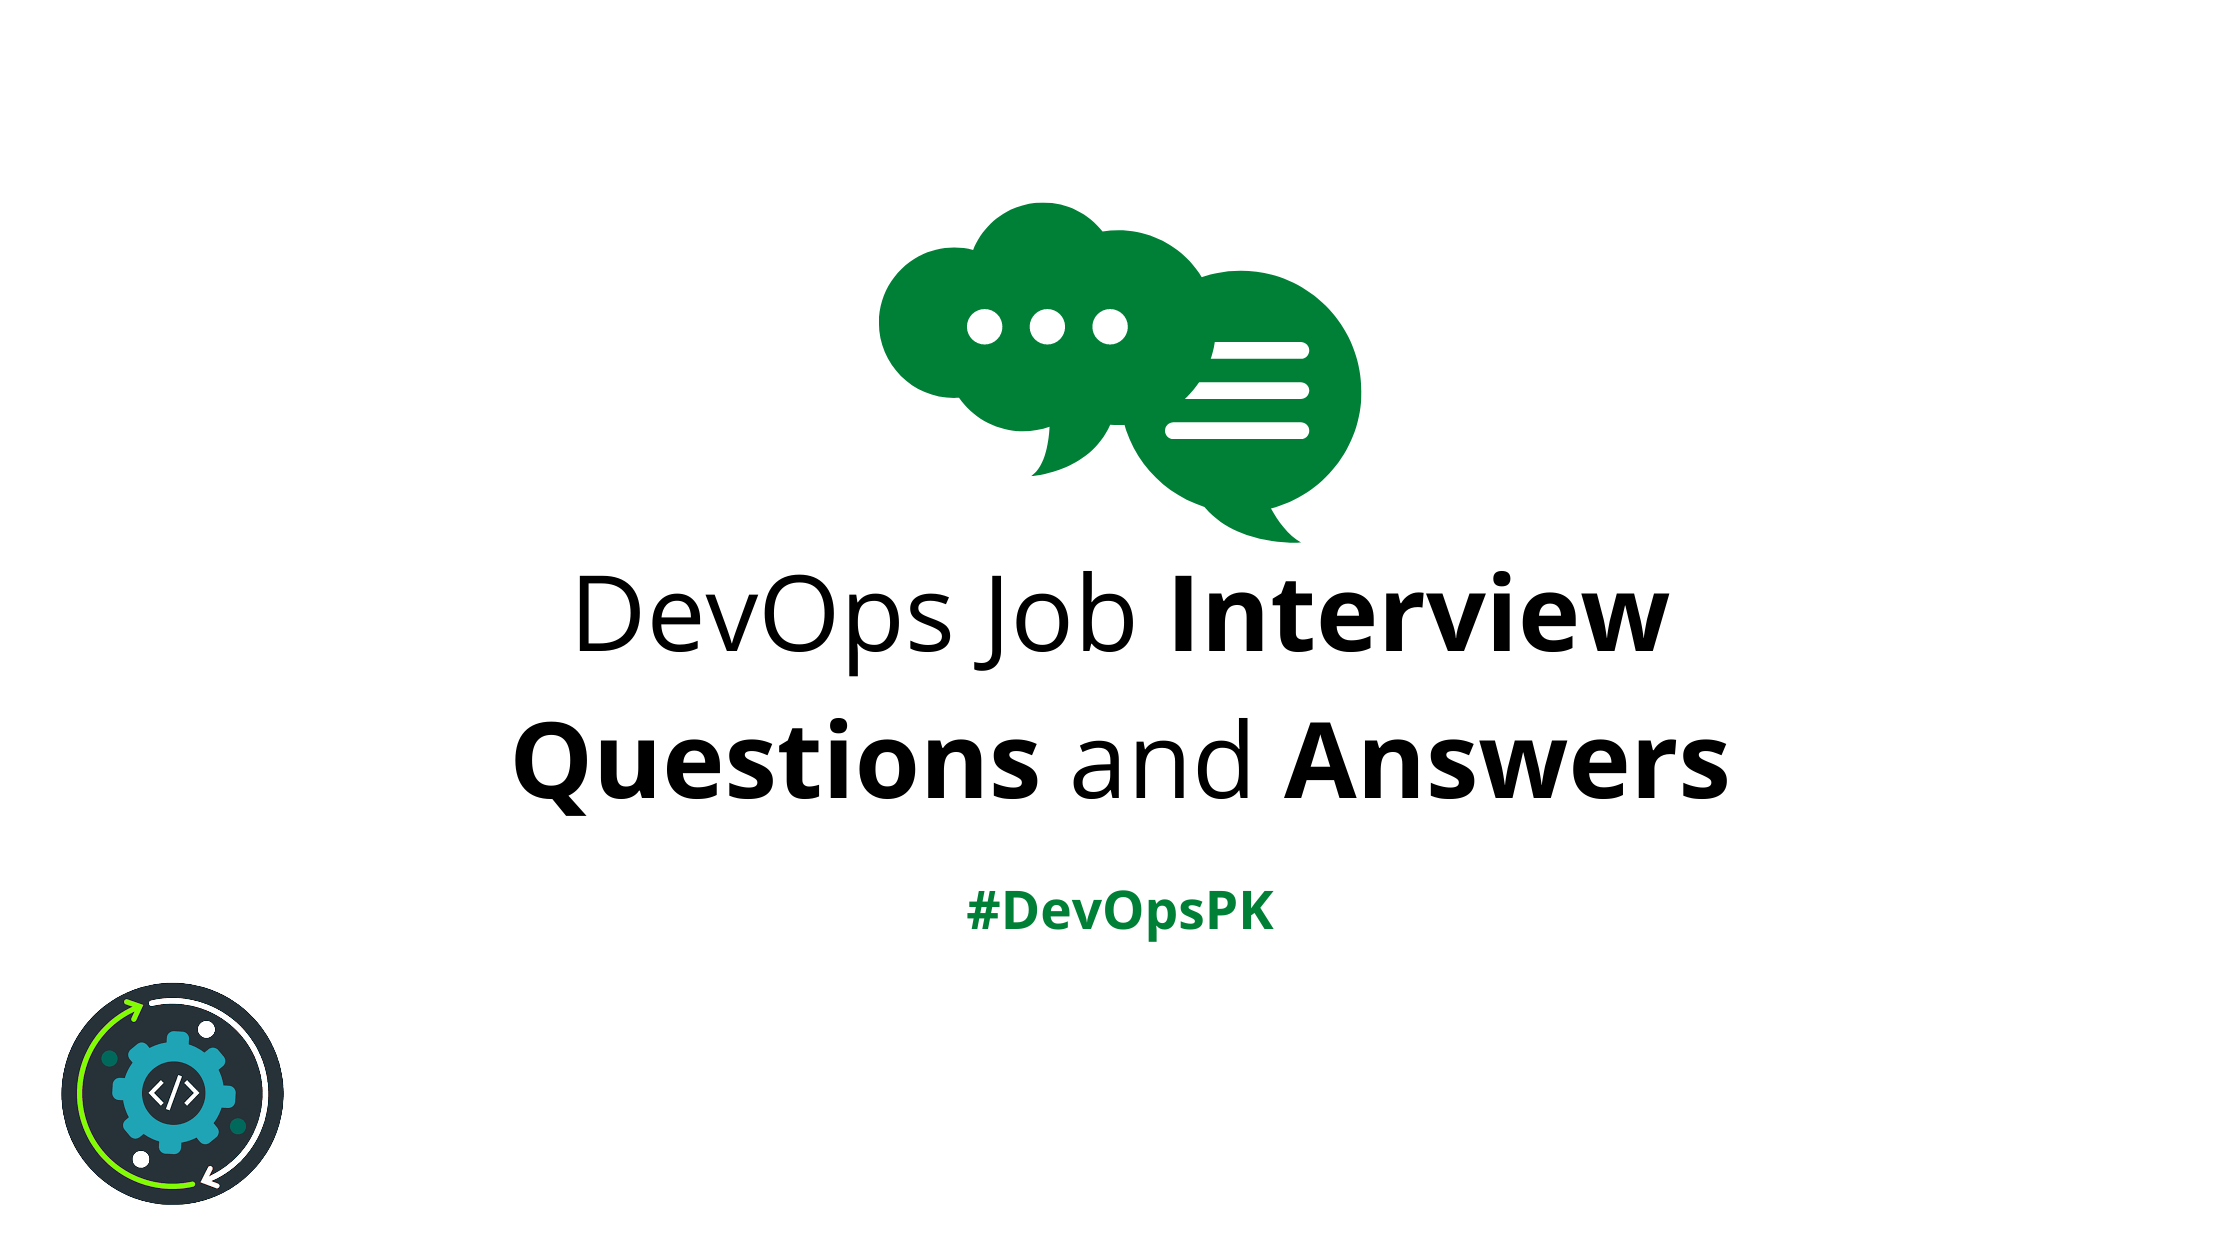 DevOps Job Interview Questions and Answers